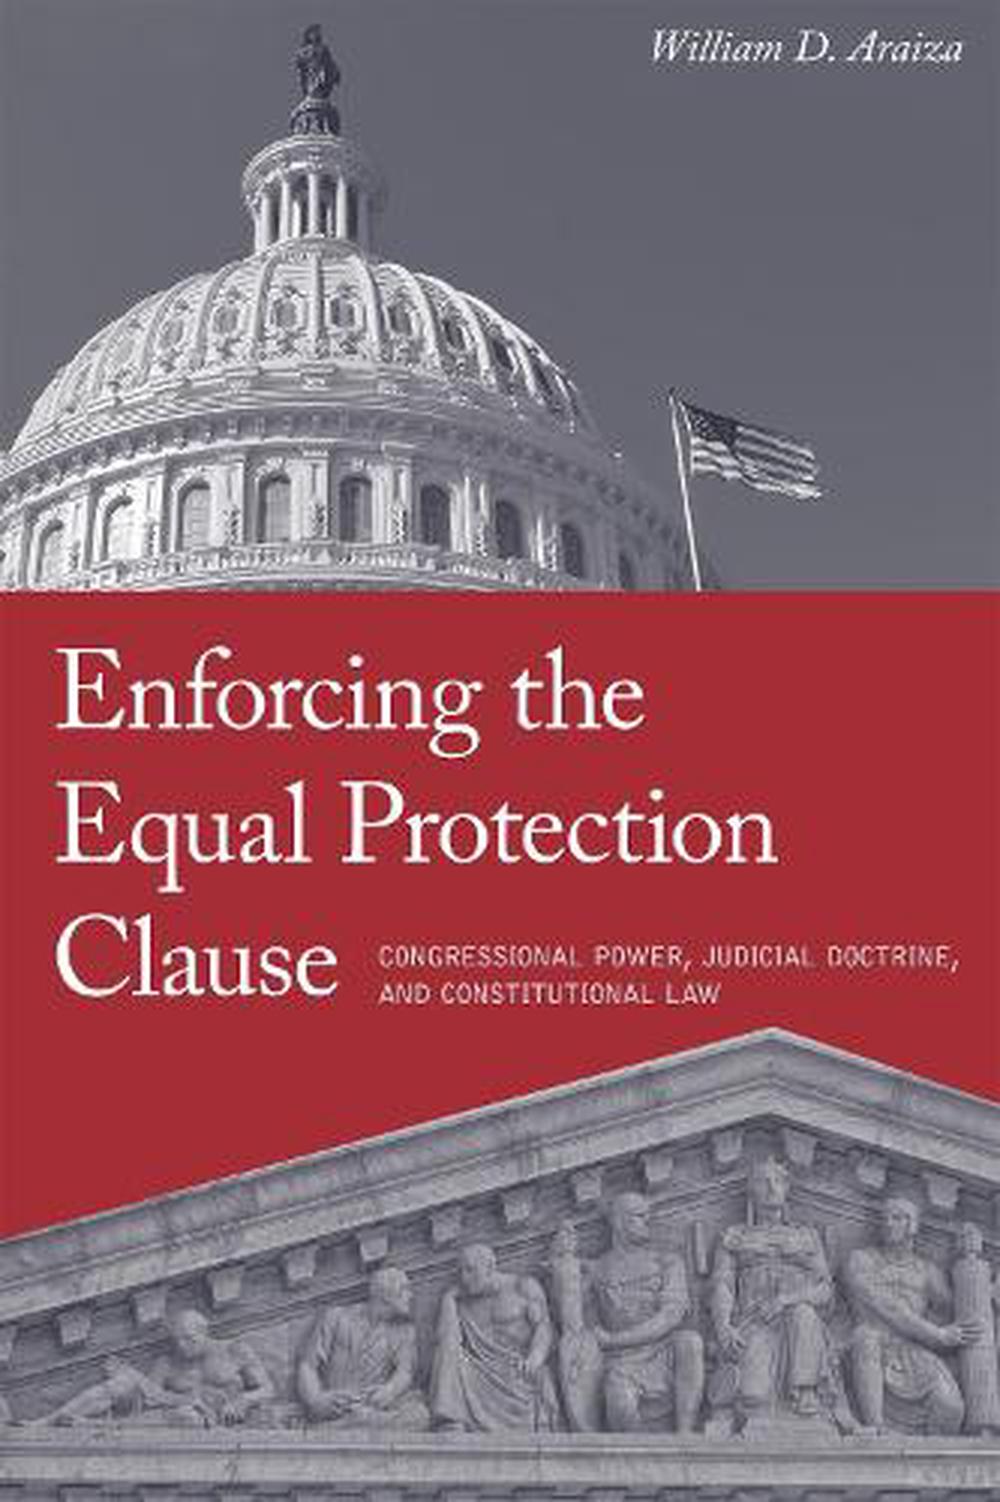 equal protection clause of the 14th amendment